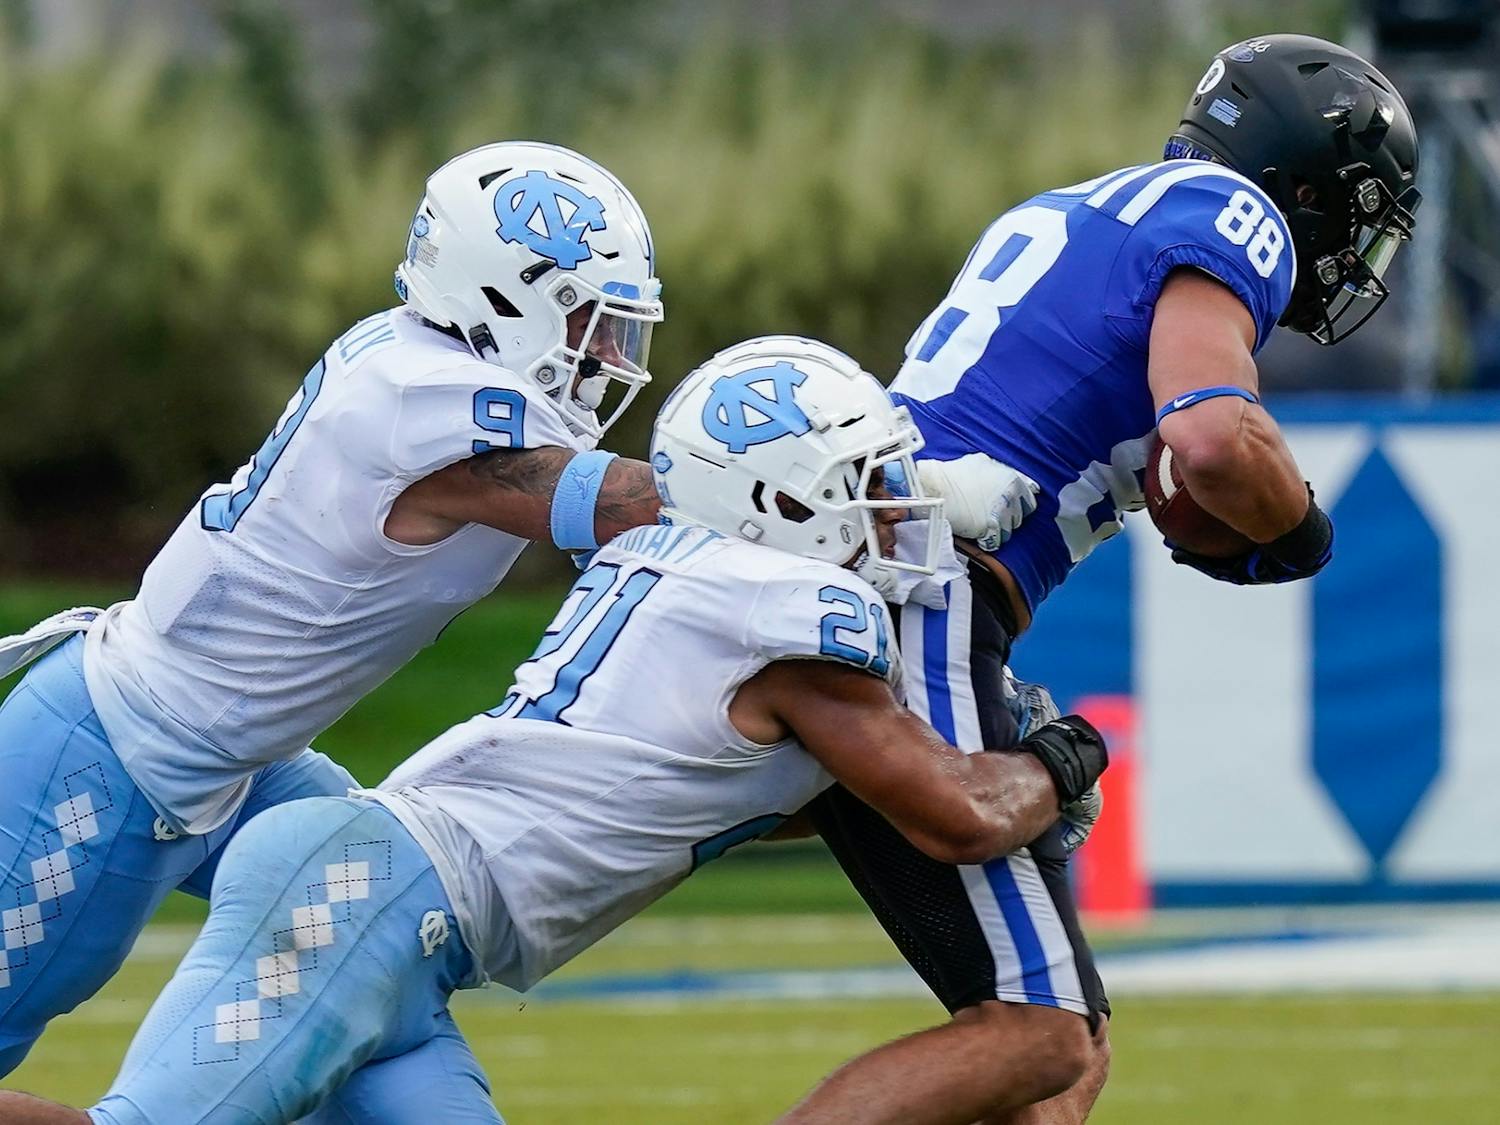 UNC linebacker Chazz Surratt (21) and defensive back Cam'Ron Kelly (9) tackle Duke tight end Jake Marwede (88) during the second half of the game at Wallace Wade Stadium on Saturday, Nov. 6, 2020. Photo courtesy of Jim Dedmon/Pool Photo-USA TODAY Sports